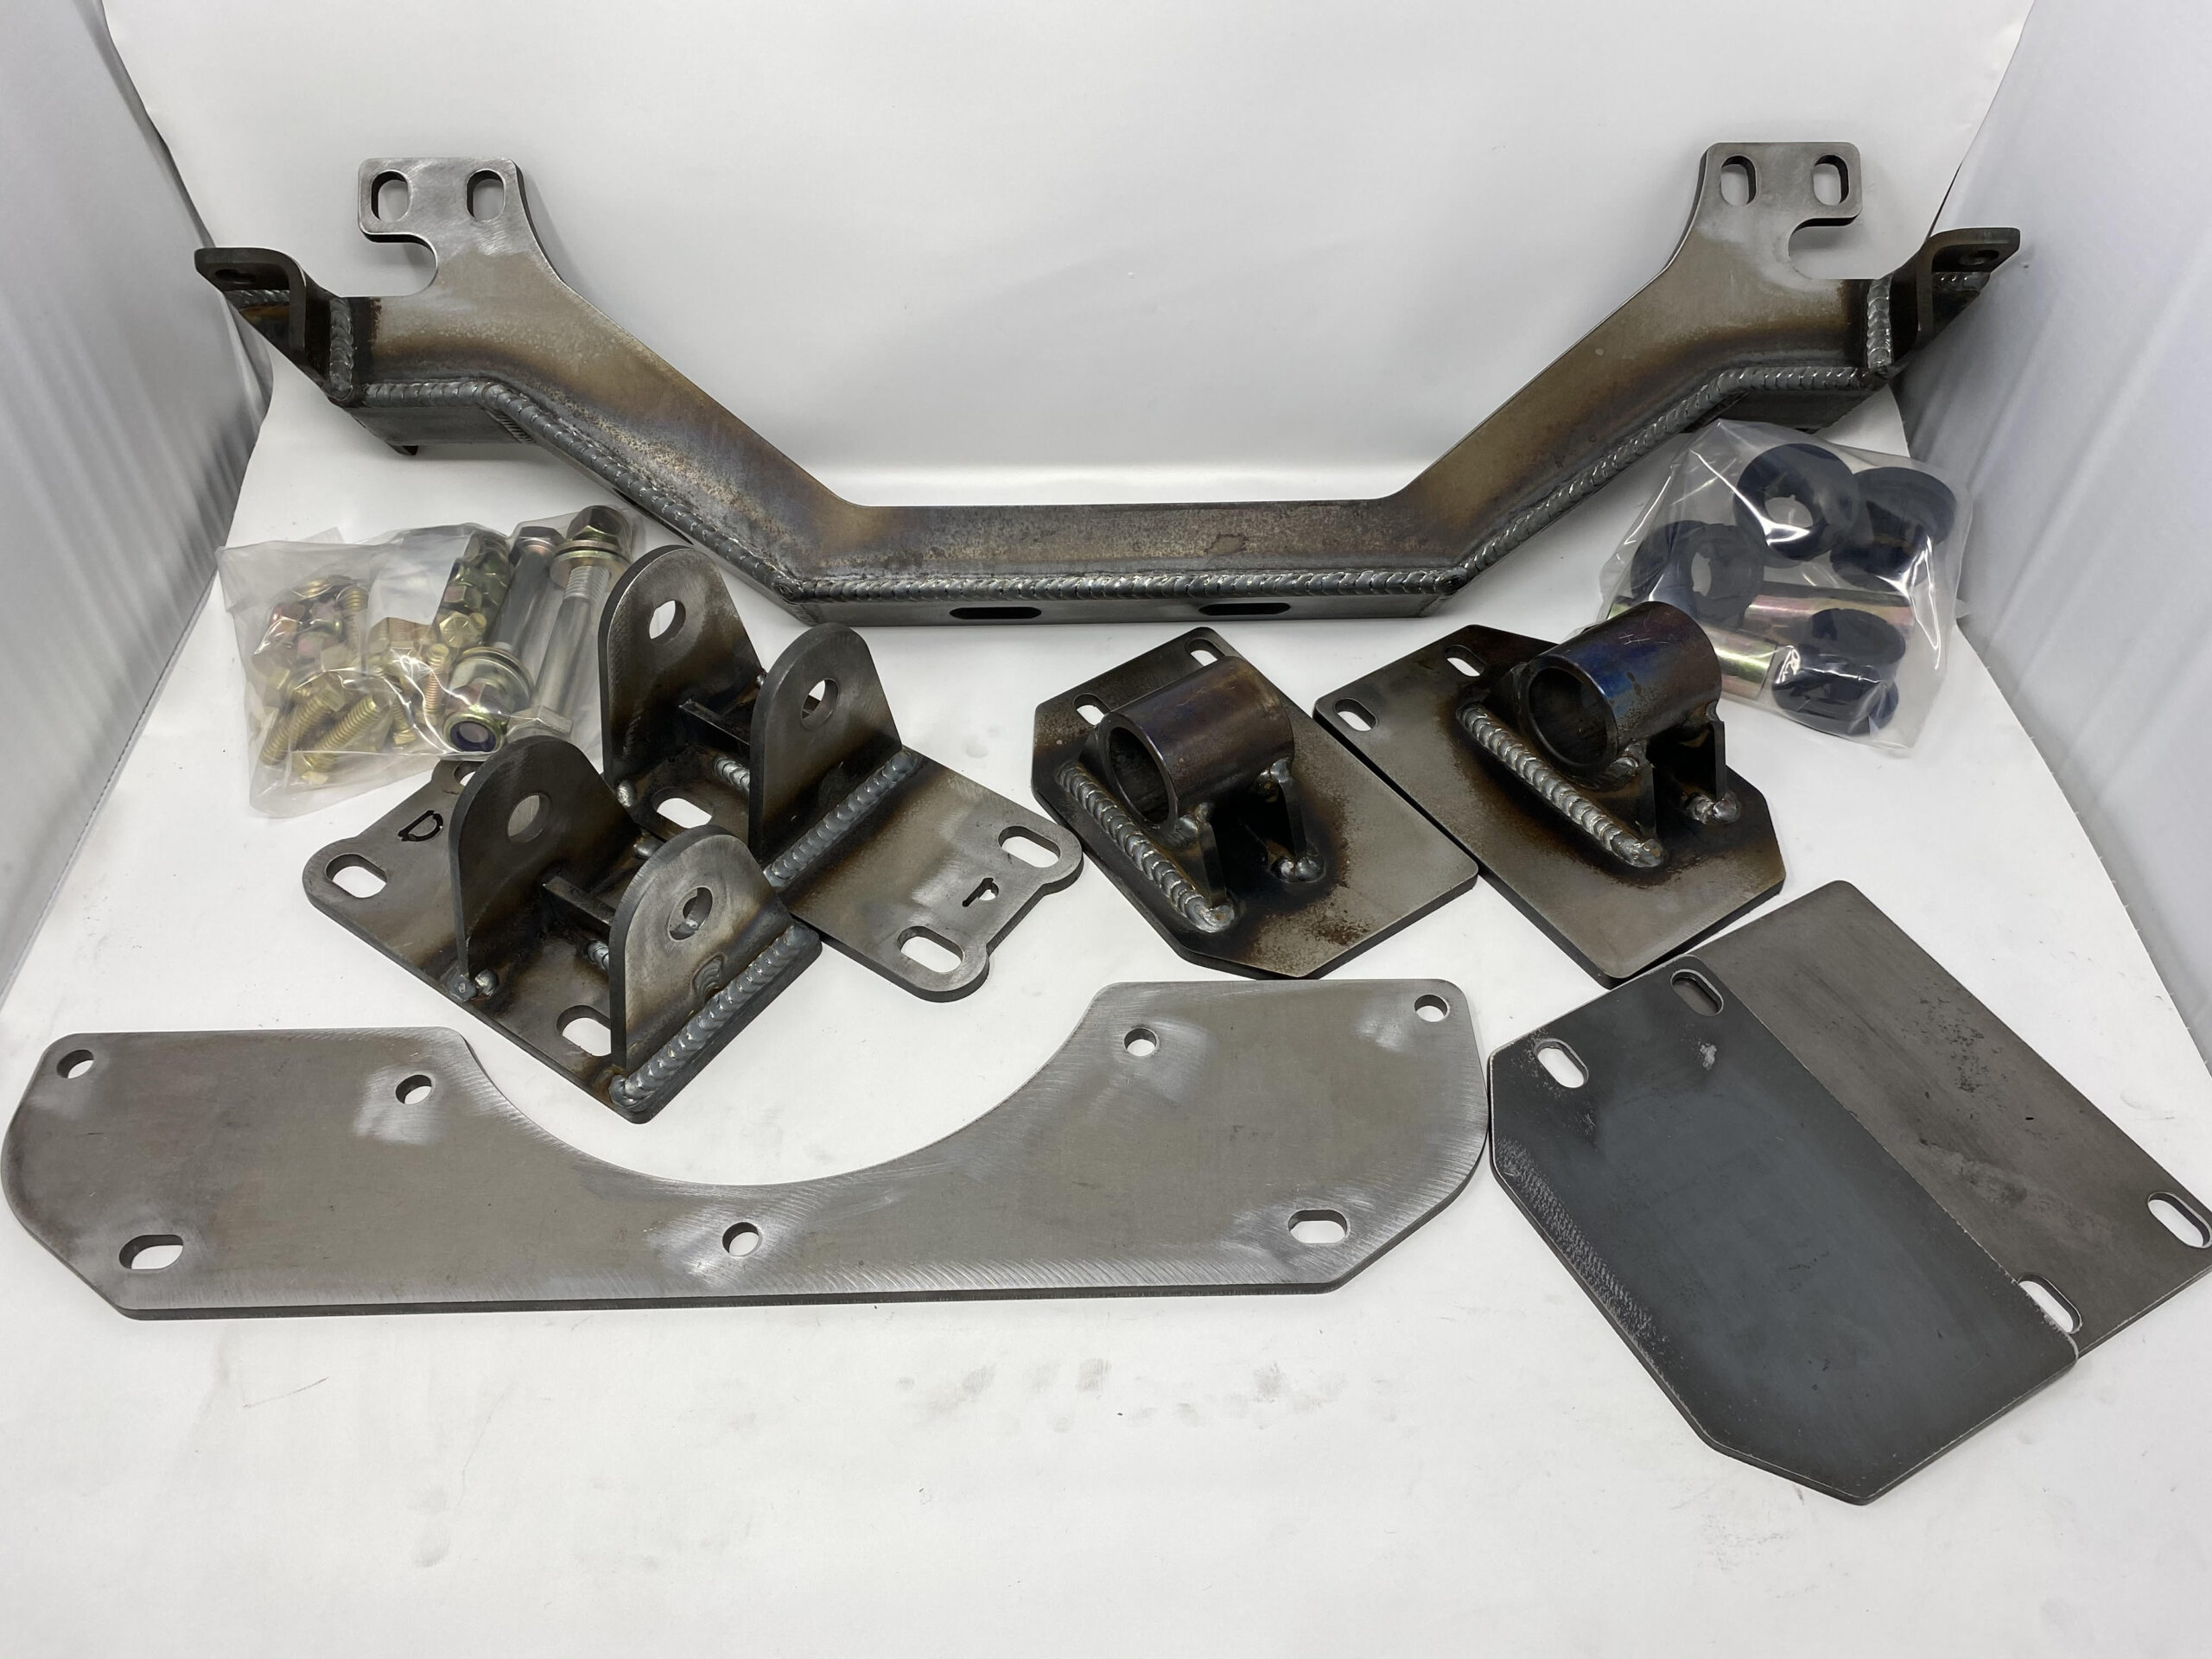 Cummins motor mounts for chevy life sciences accenture